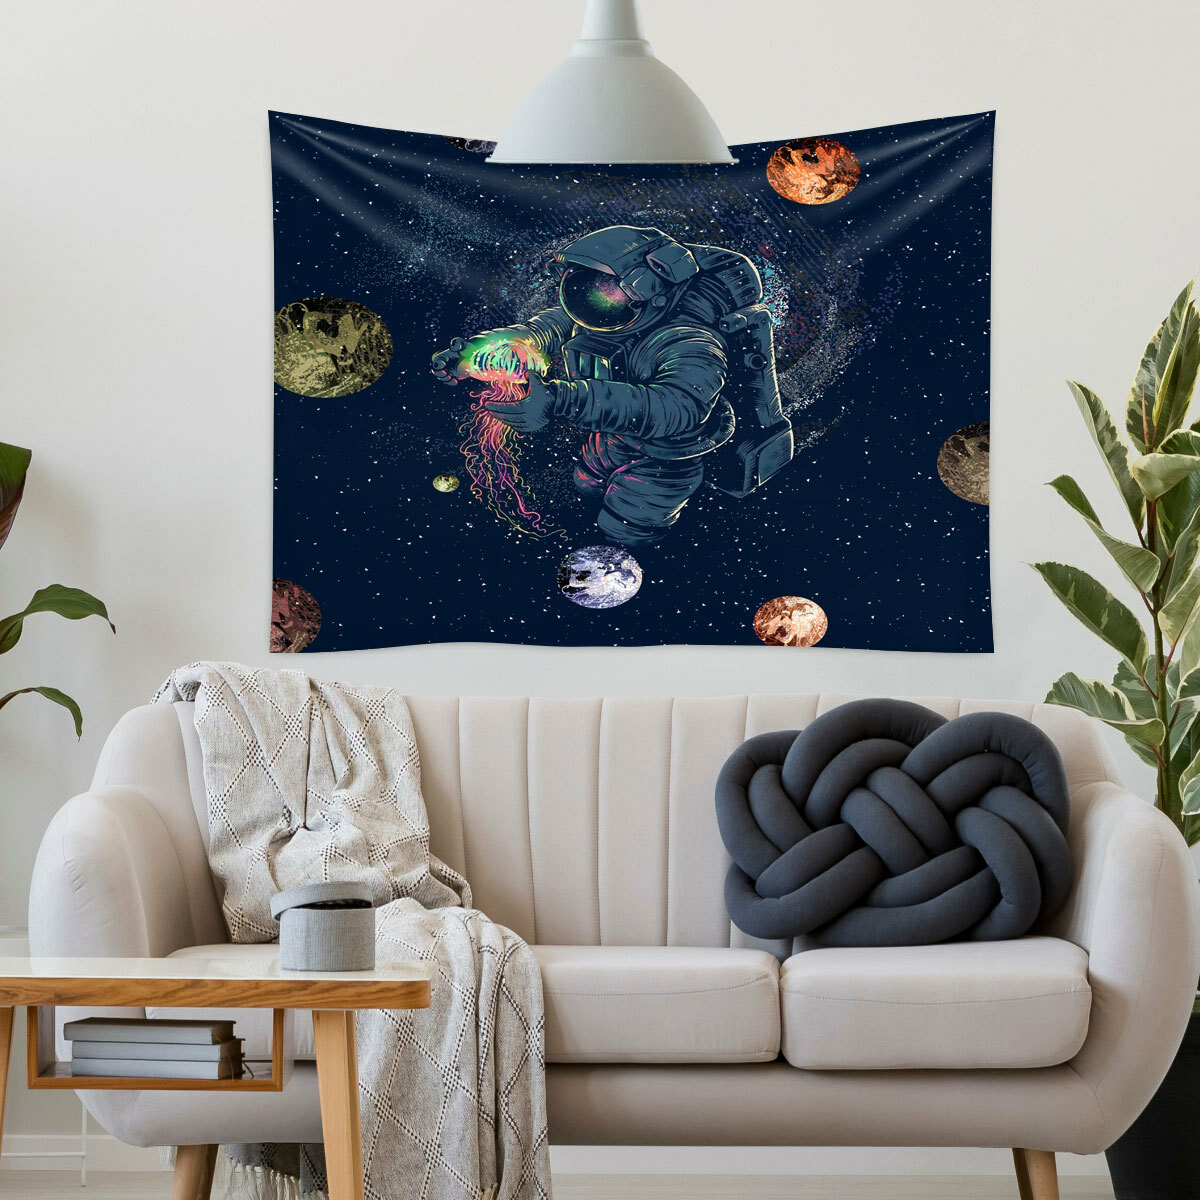 

Astronaut Tapestries Fantasy Spaceman Wall Hanging Tapestry Galaxy Planet Wall Art For Bedroom Living Room Dorm Decorati